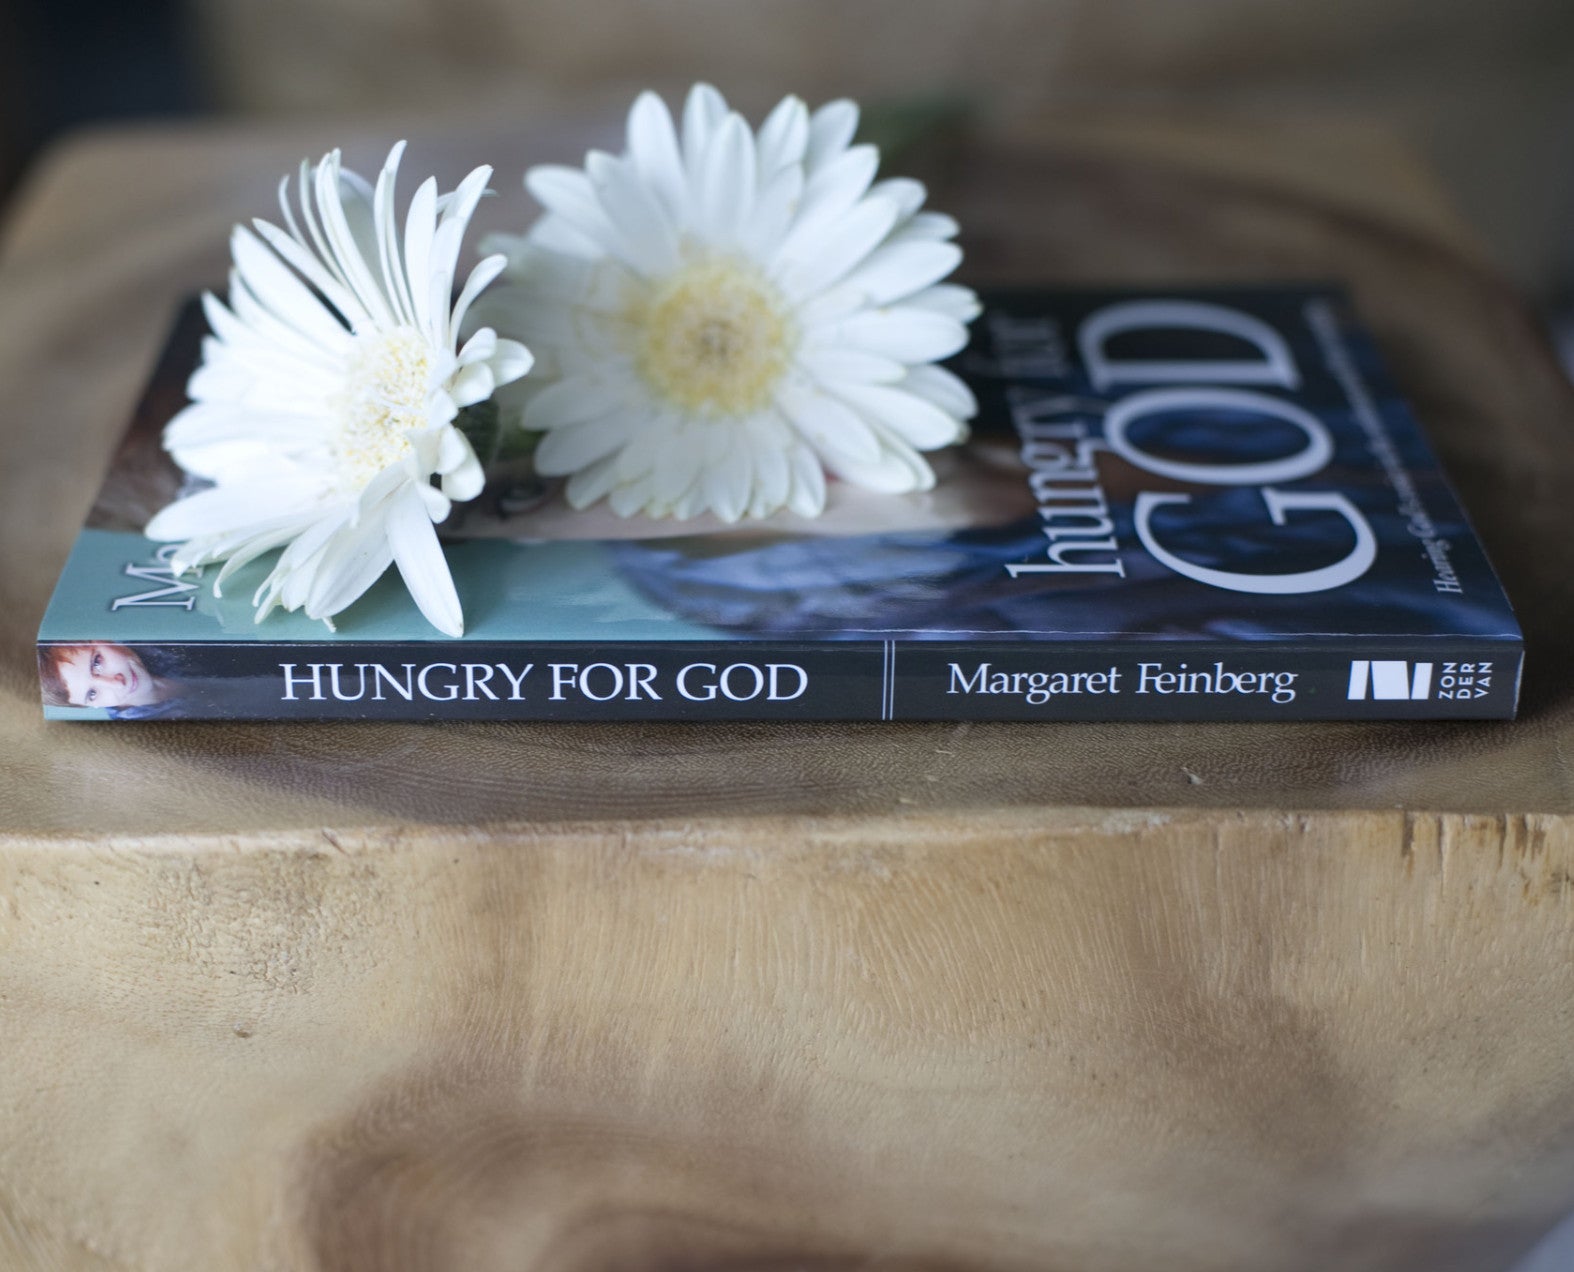 Hungry For God: Hearing God's Voice in the Ordinary and the Everyday